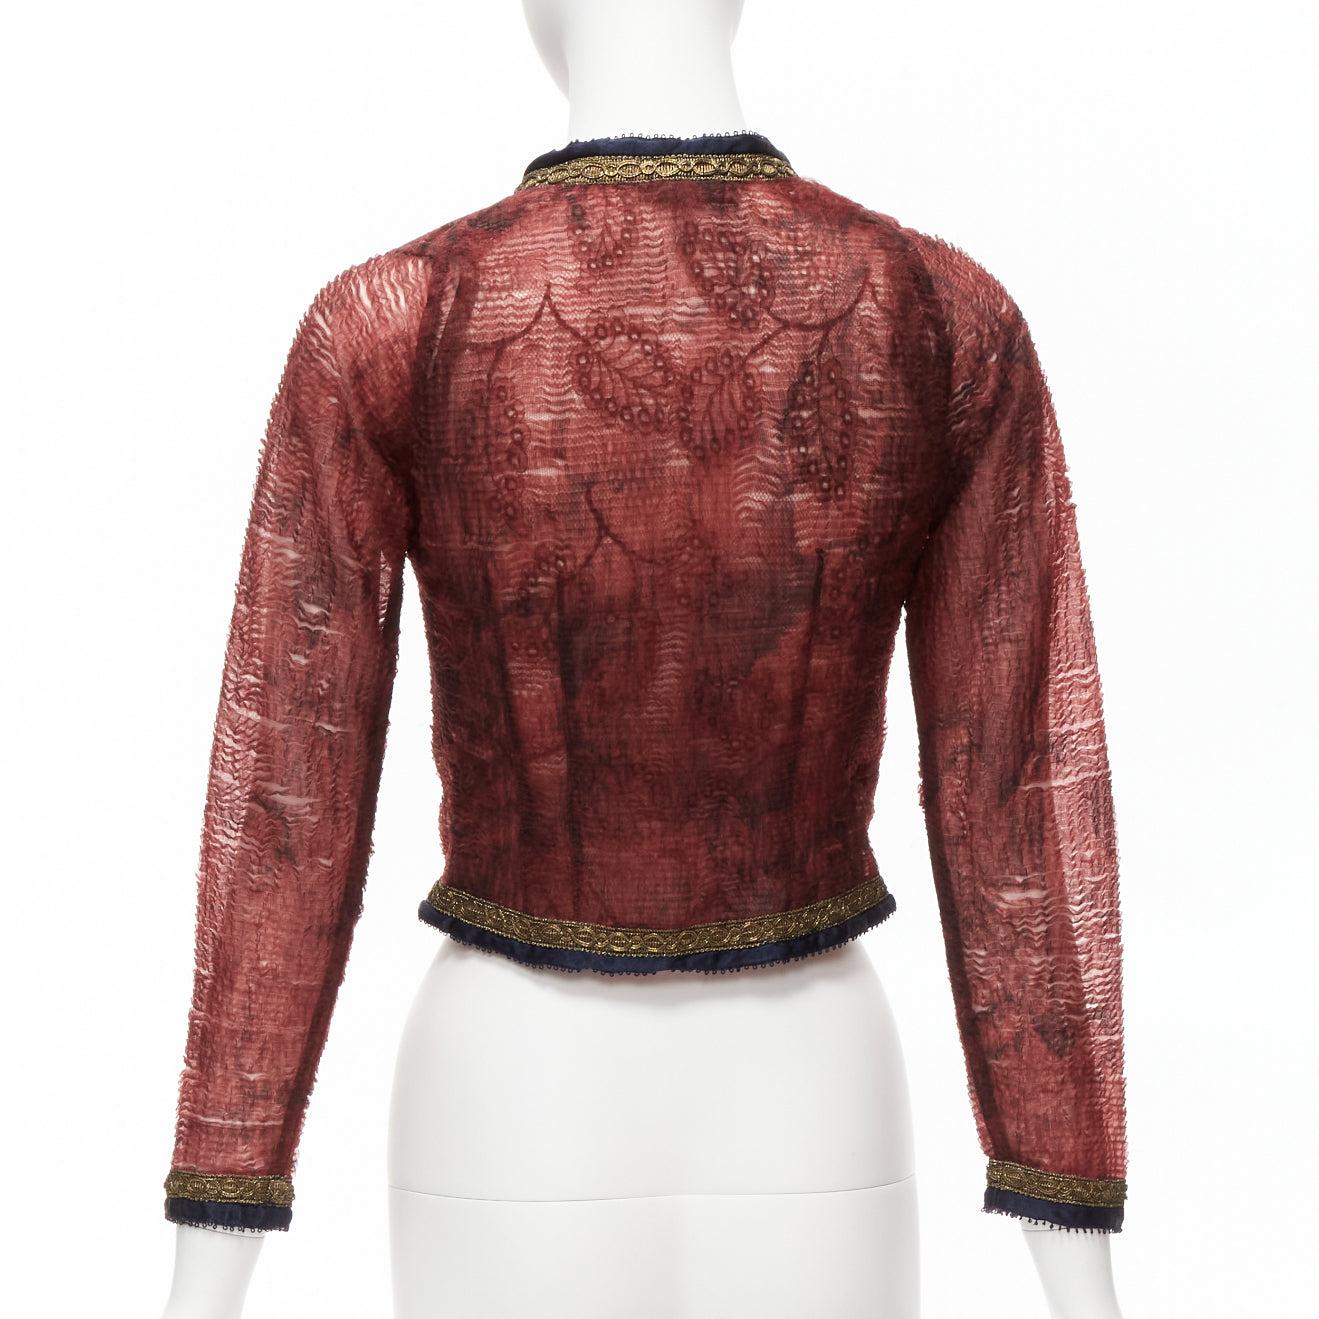 VOYAGE INVEST IN THE ORIGINAL LONDON sheer gold satin lace trim cropped jacket For Sale 1